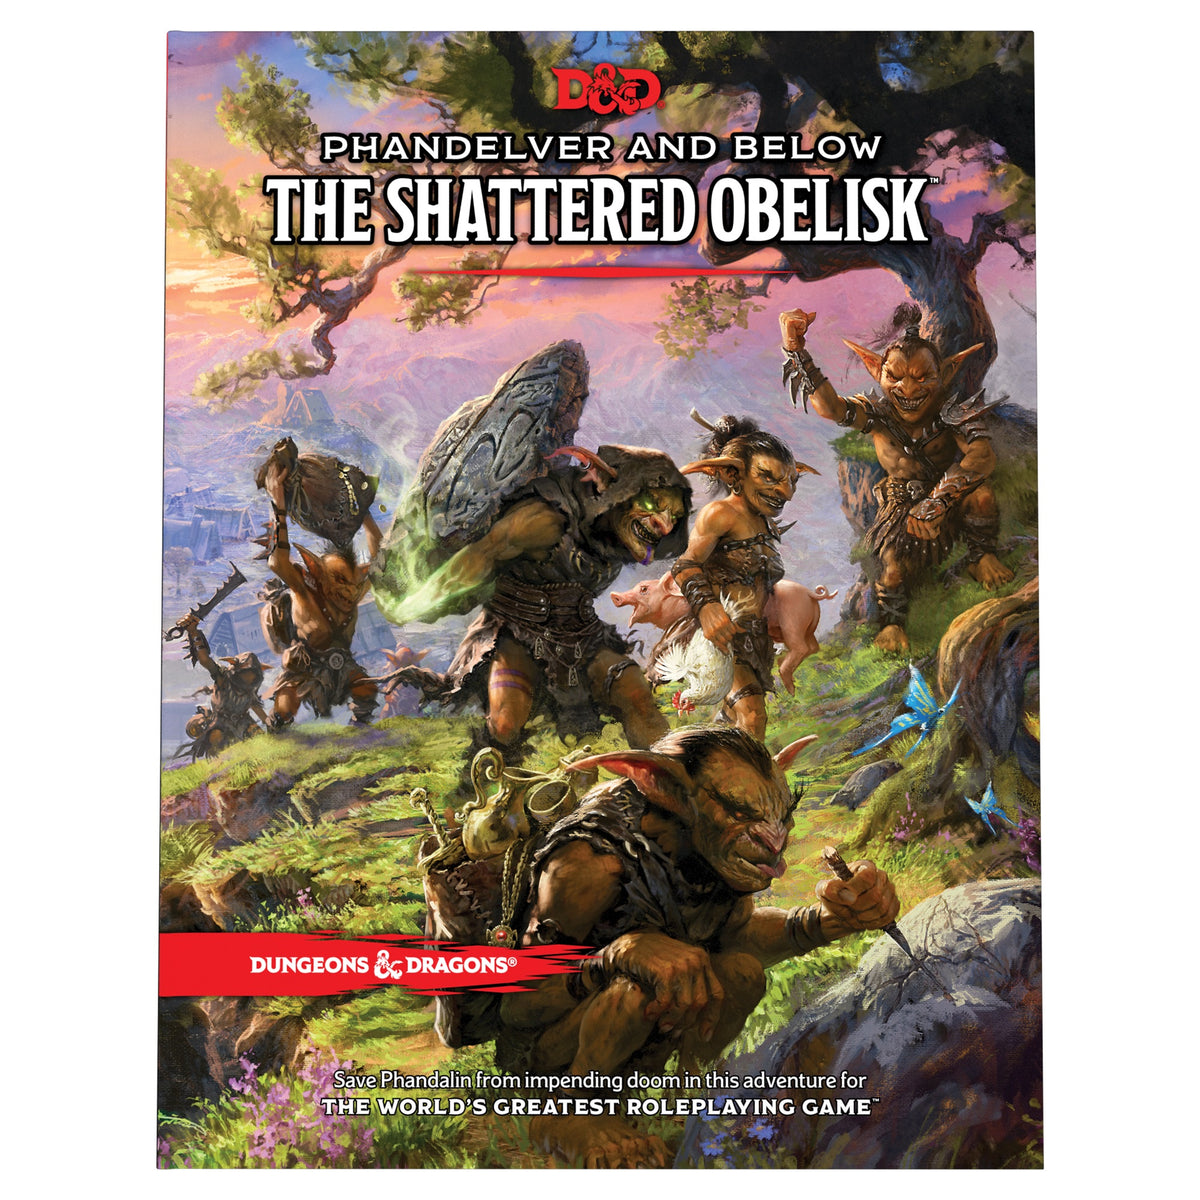 Dungeons and Dragons Phandelver and Below The Shattered Obelisk